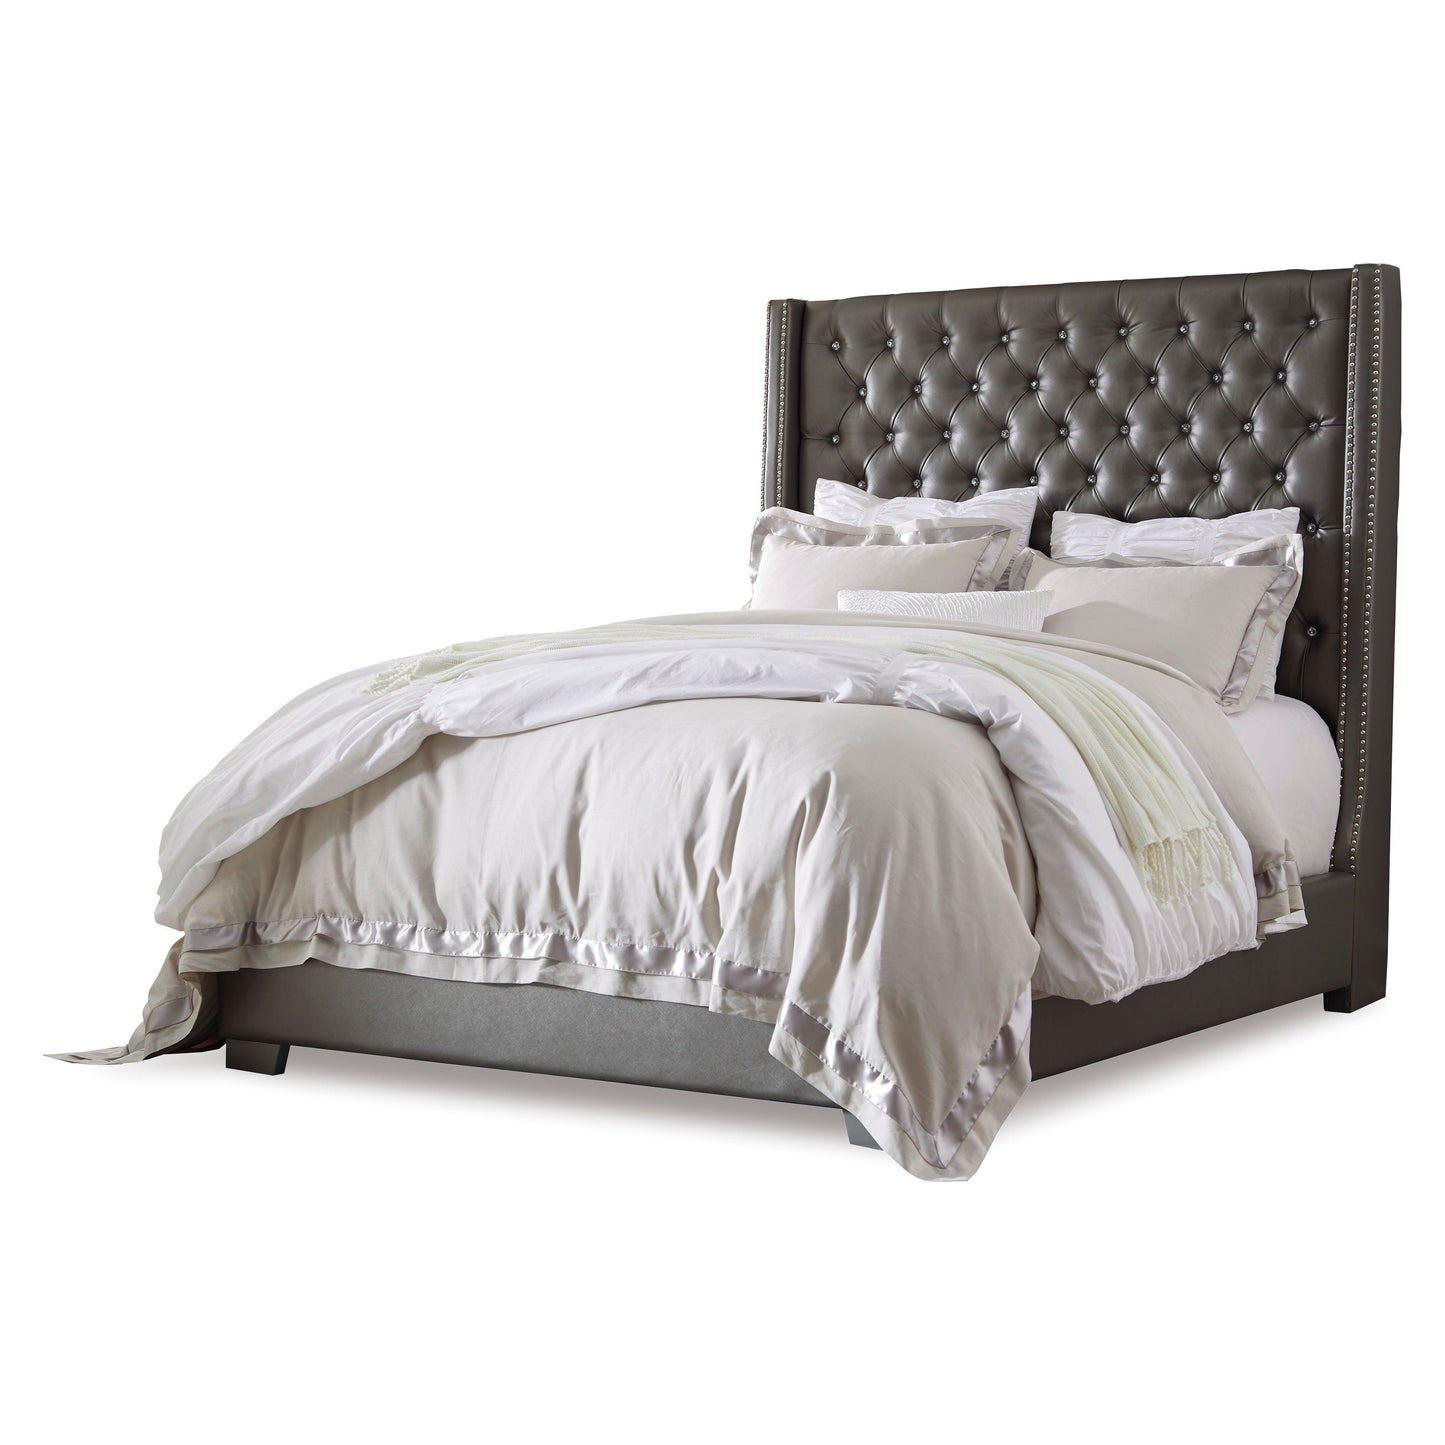 CORALAYNE UPHOLSTERED BED - GRAY